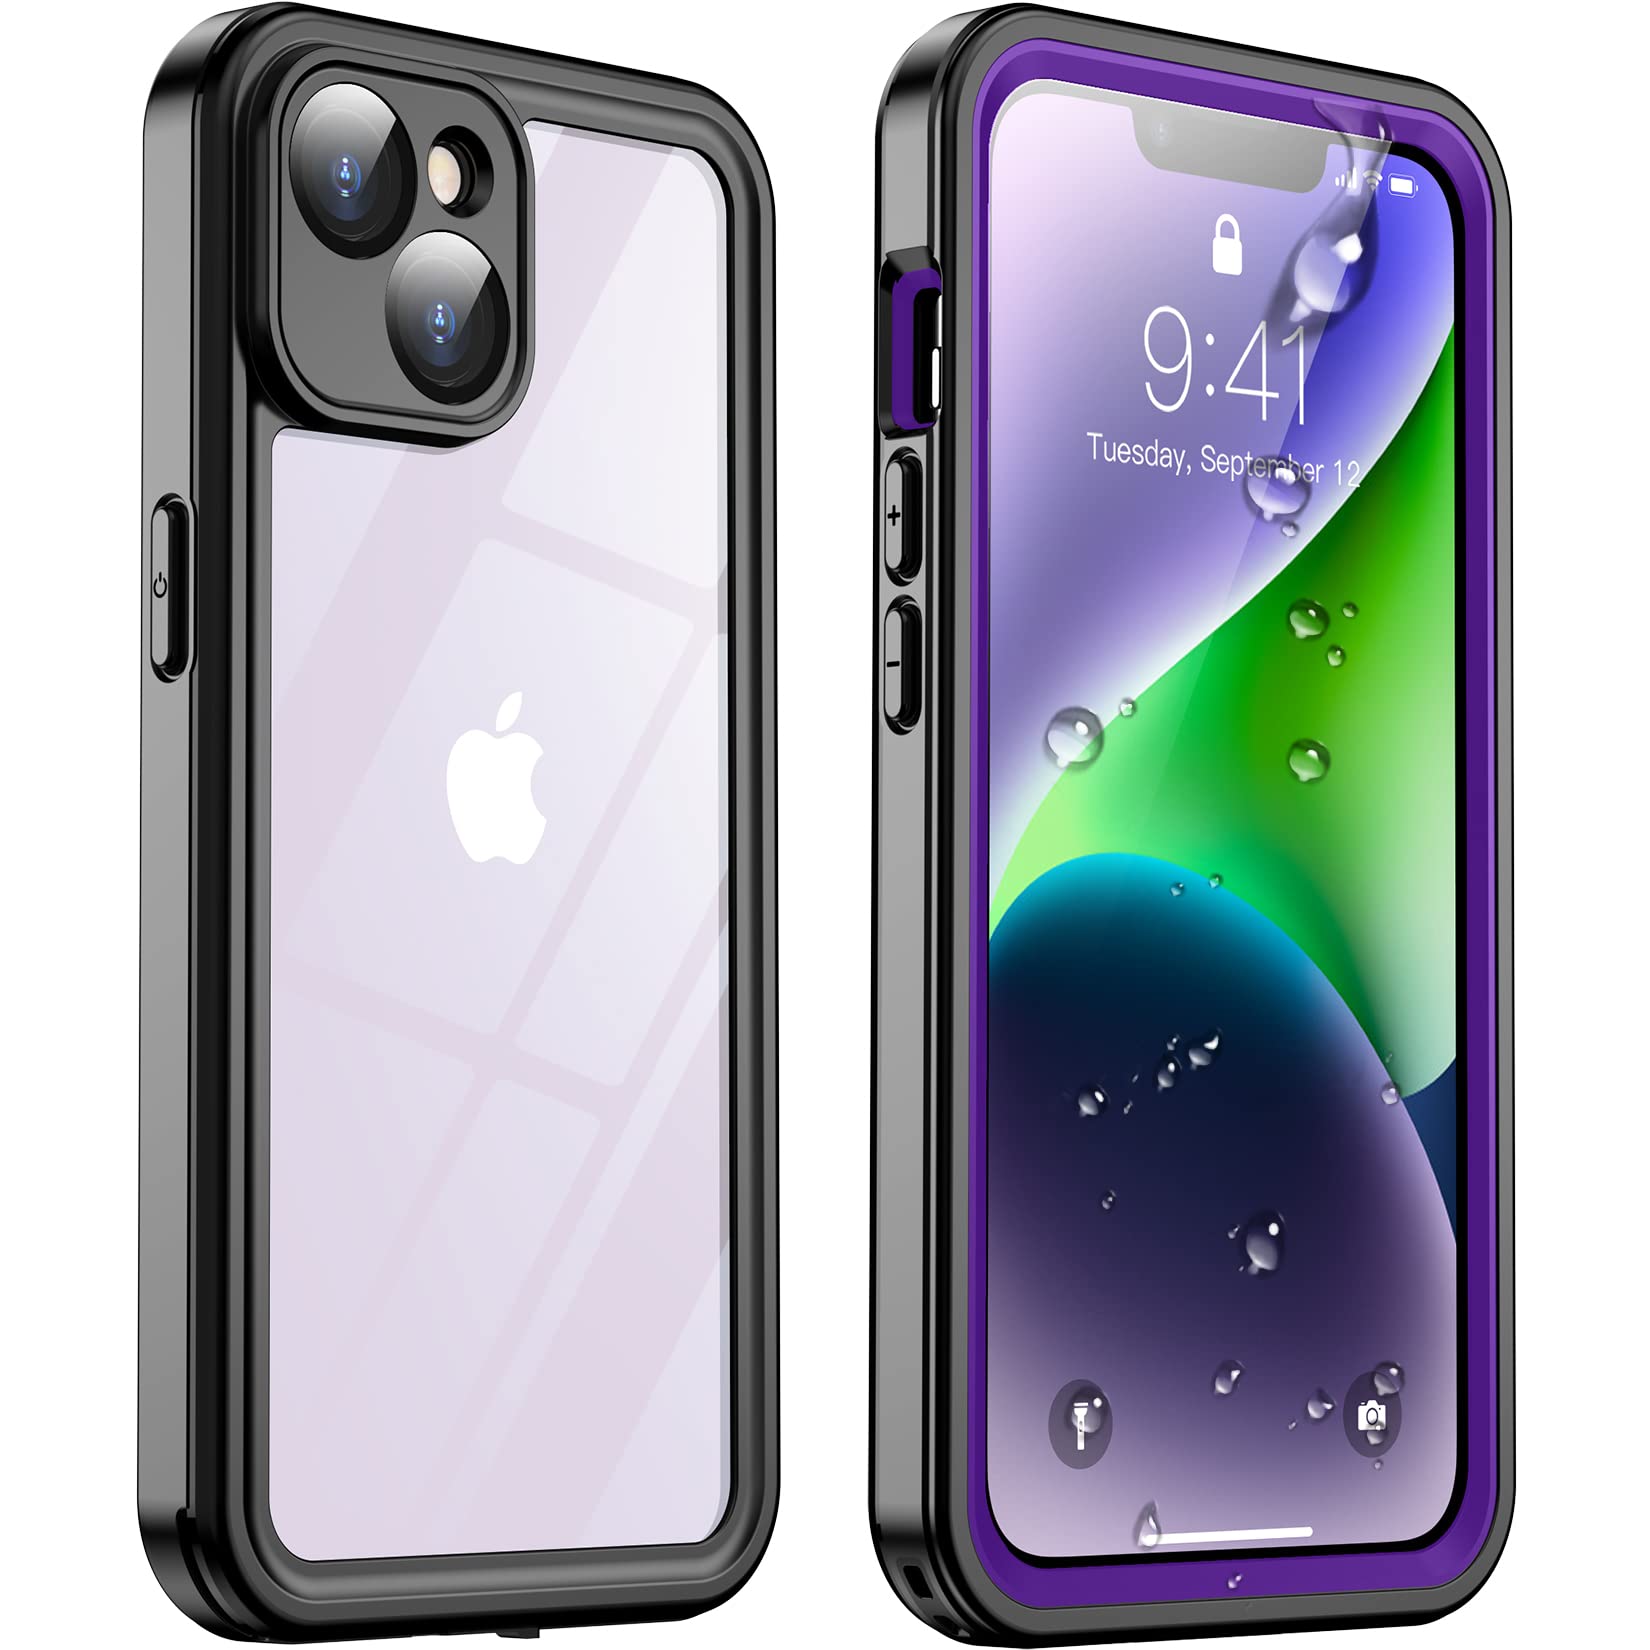 Temdan iPhone 12/12 Pro Case, [Not Yellowing] [Ultra Slim] Lightweight & Thin, Shockproof Protective, Screen & Camera Protection - Crystal Clear